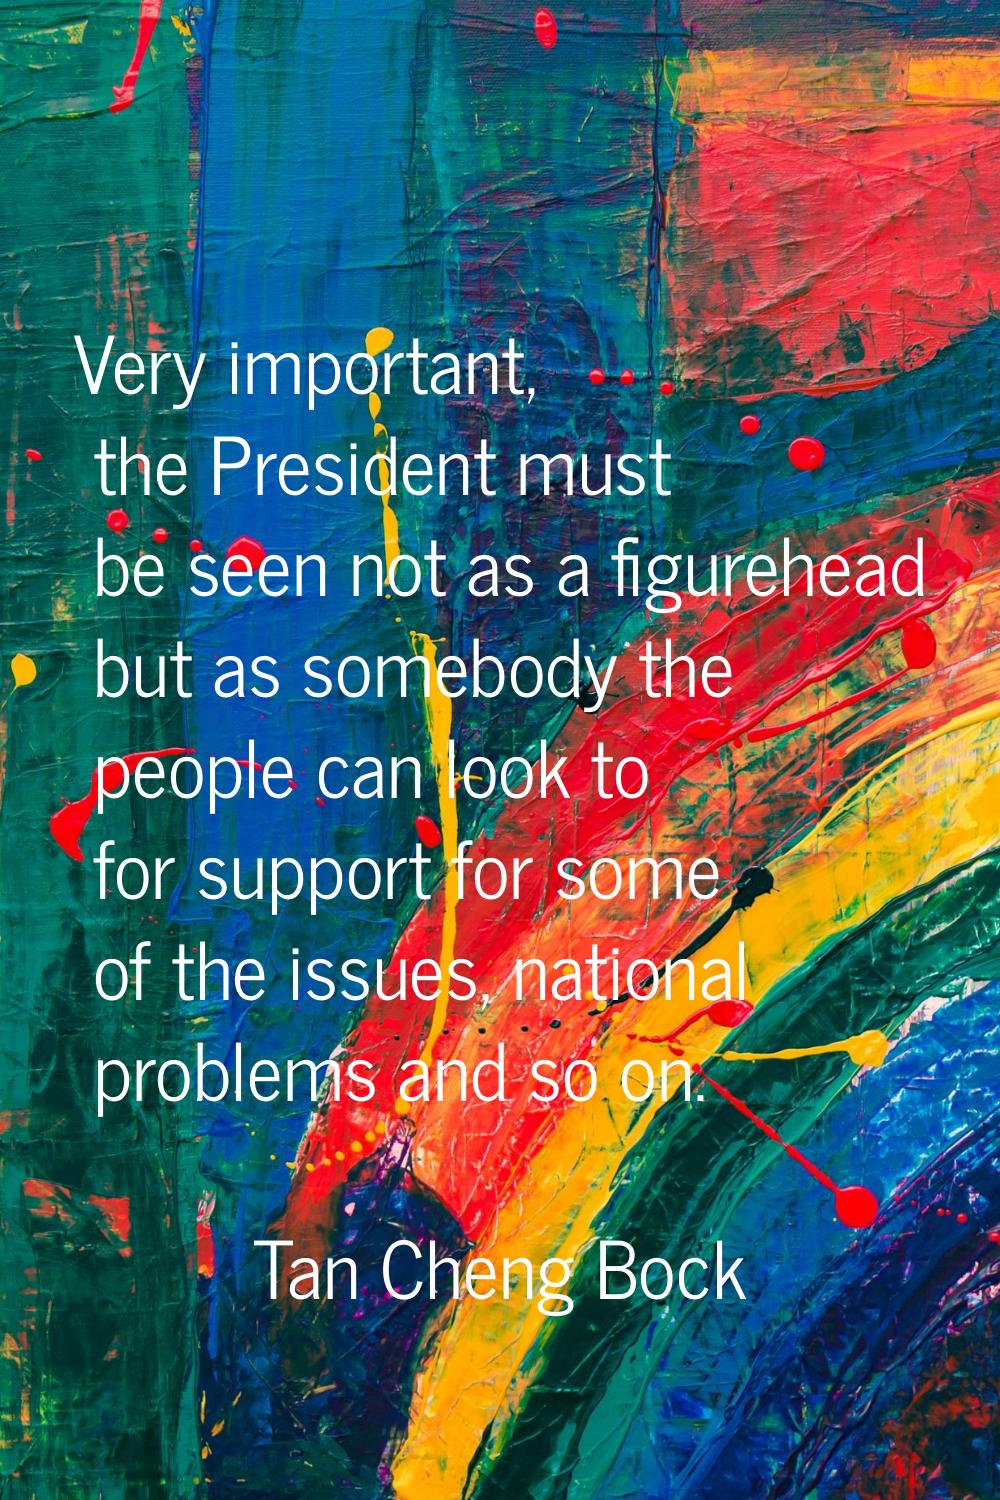 Very important, the President must be seen not as a figurehead but as somebody the people can look 